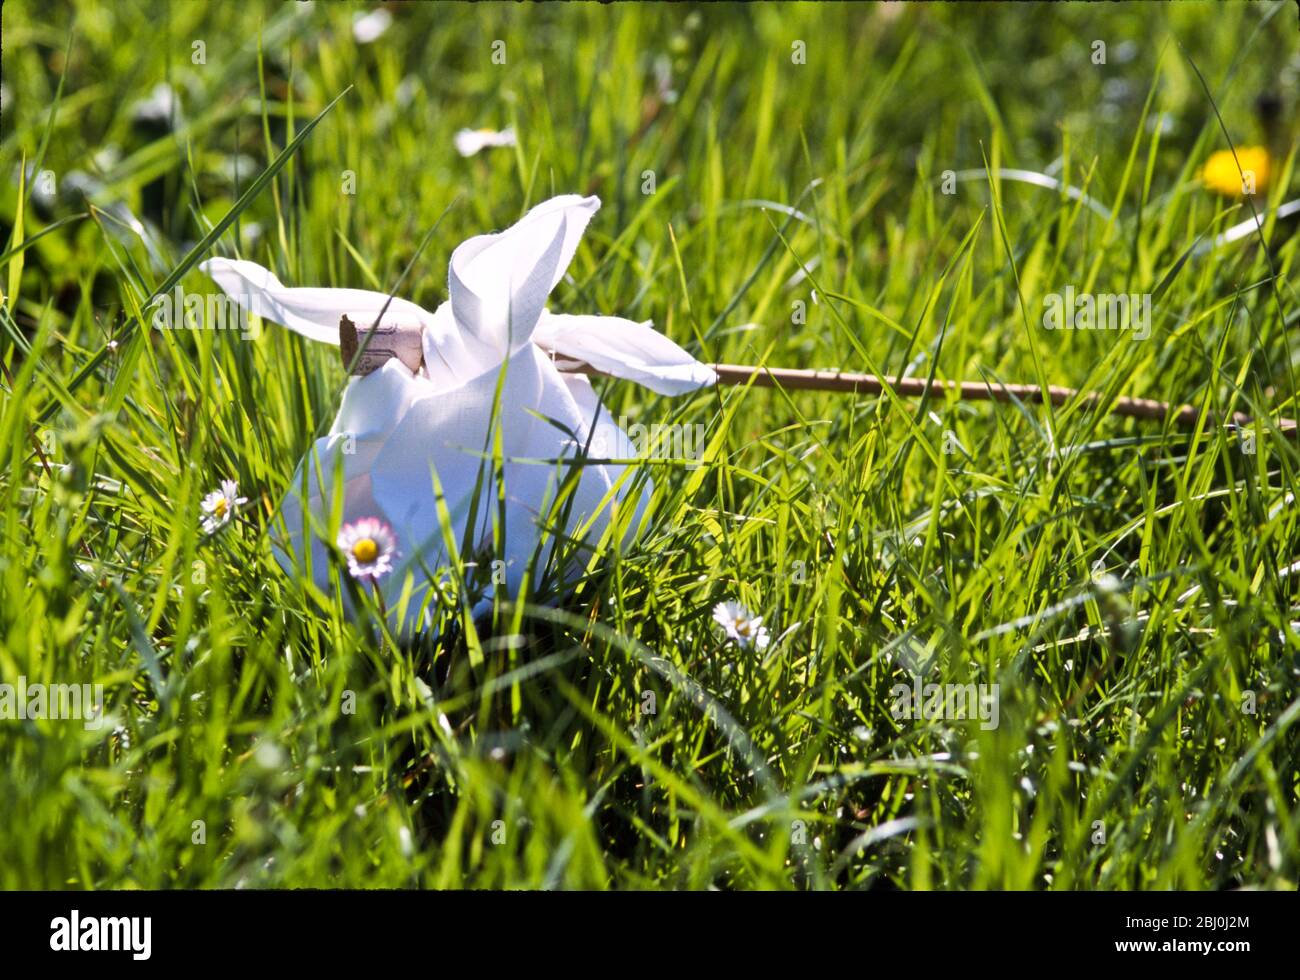 Picnic tied up in a handkerchief on a stick sitting in long grass with daisies and dandelions. - Stock Photo